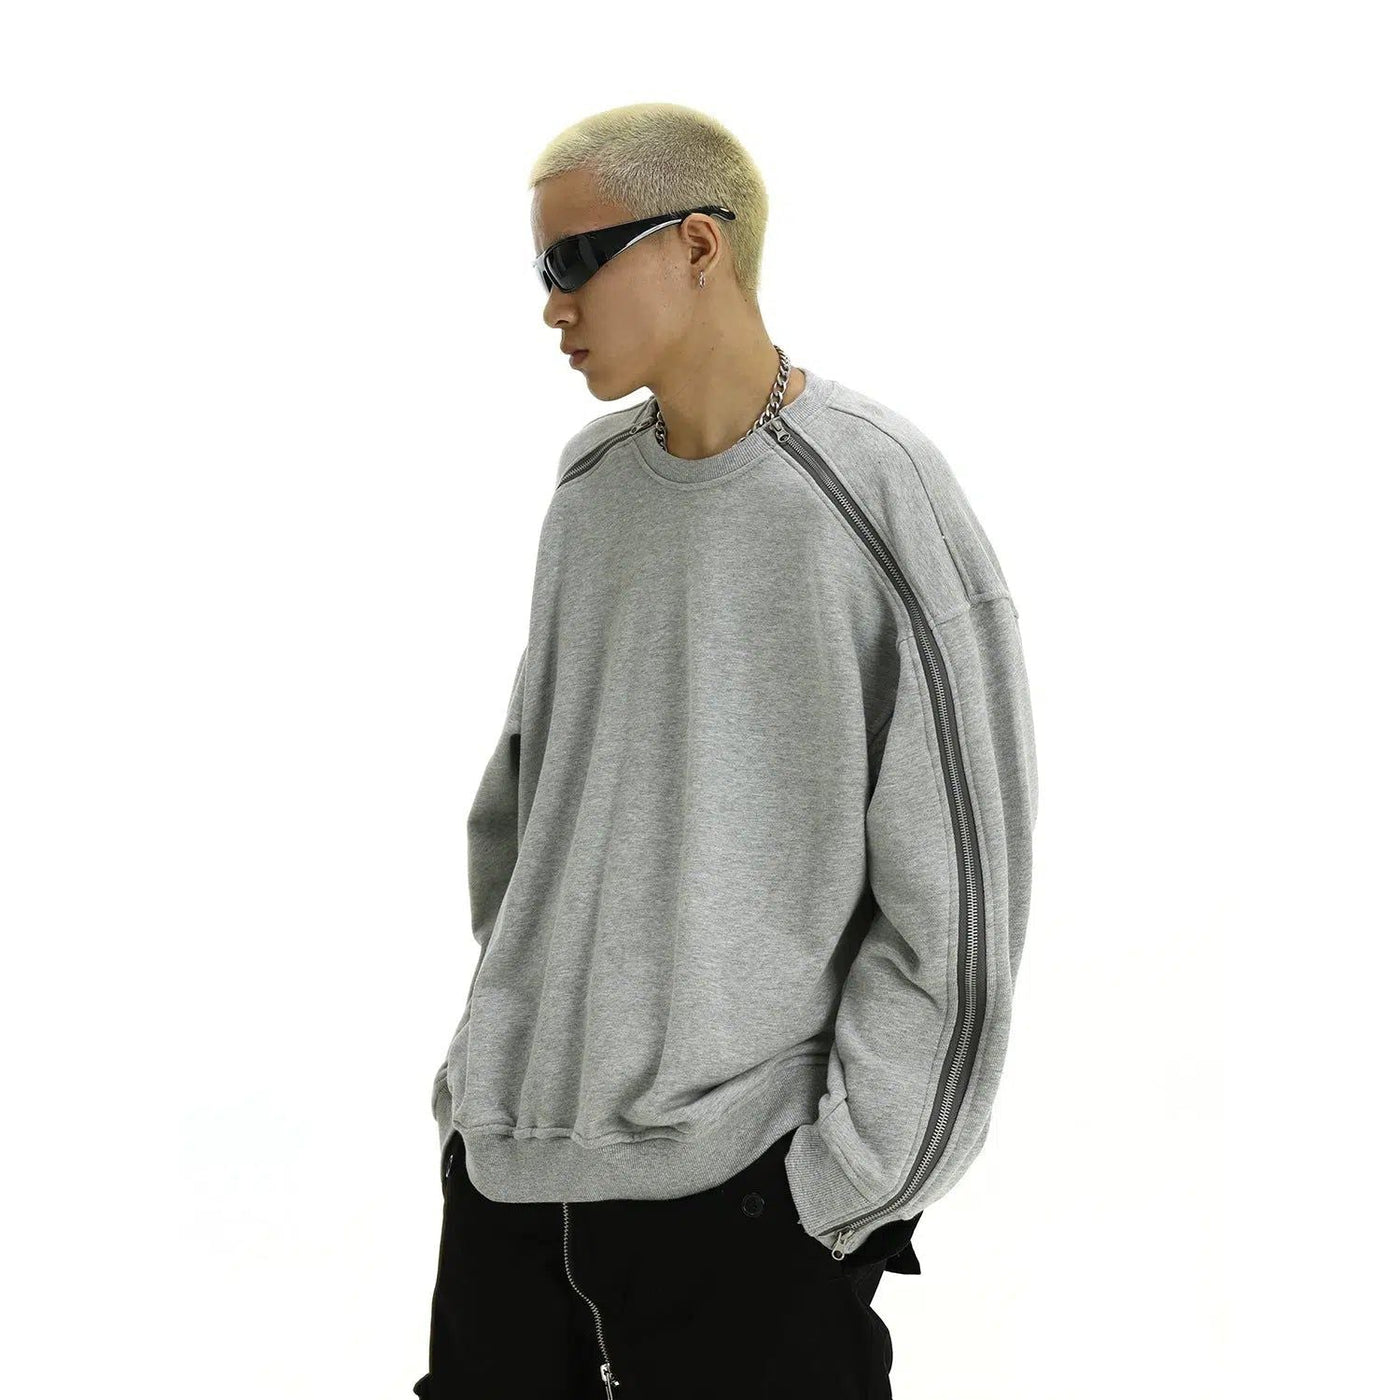 Casual Side Full-Zip Crewneck Korean Street Fashion Crewneck By MEBXX Shop Online at OH Vault